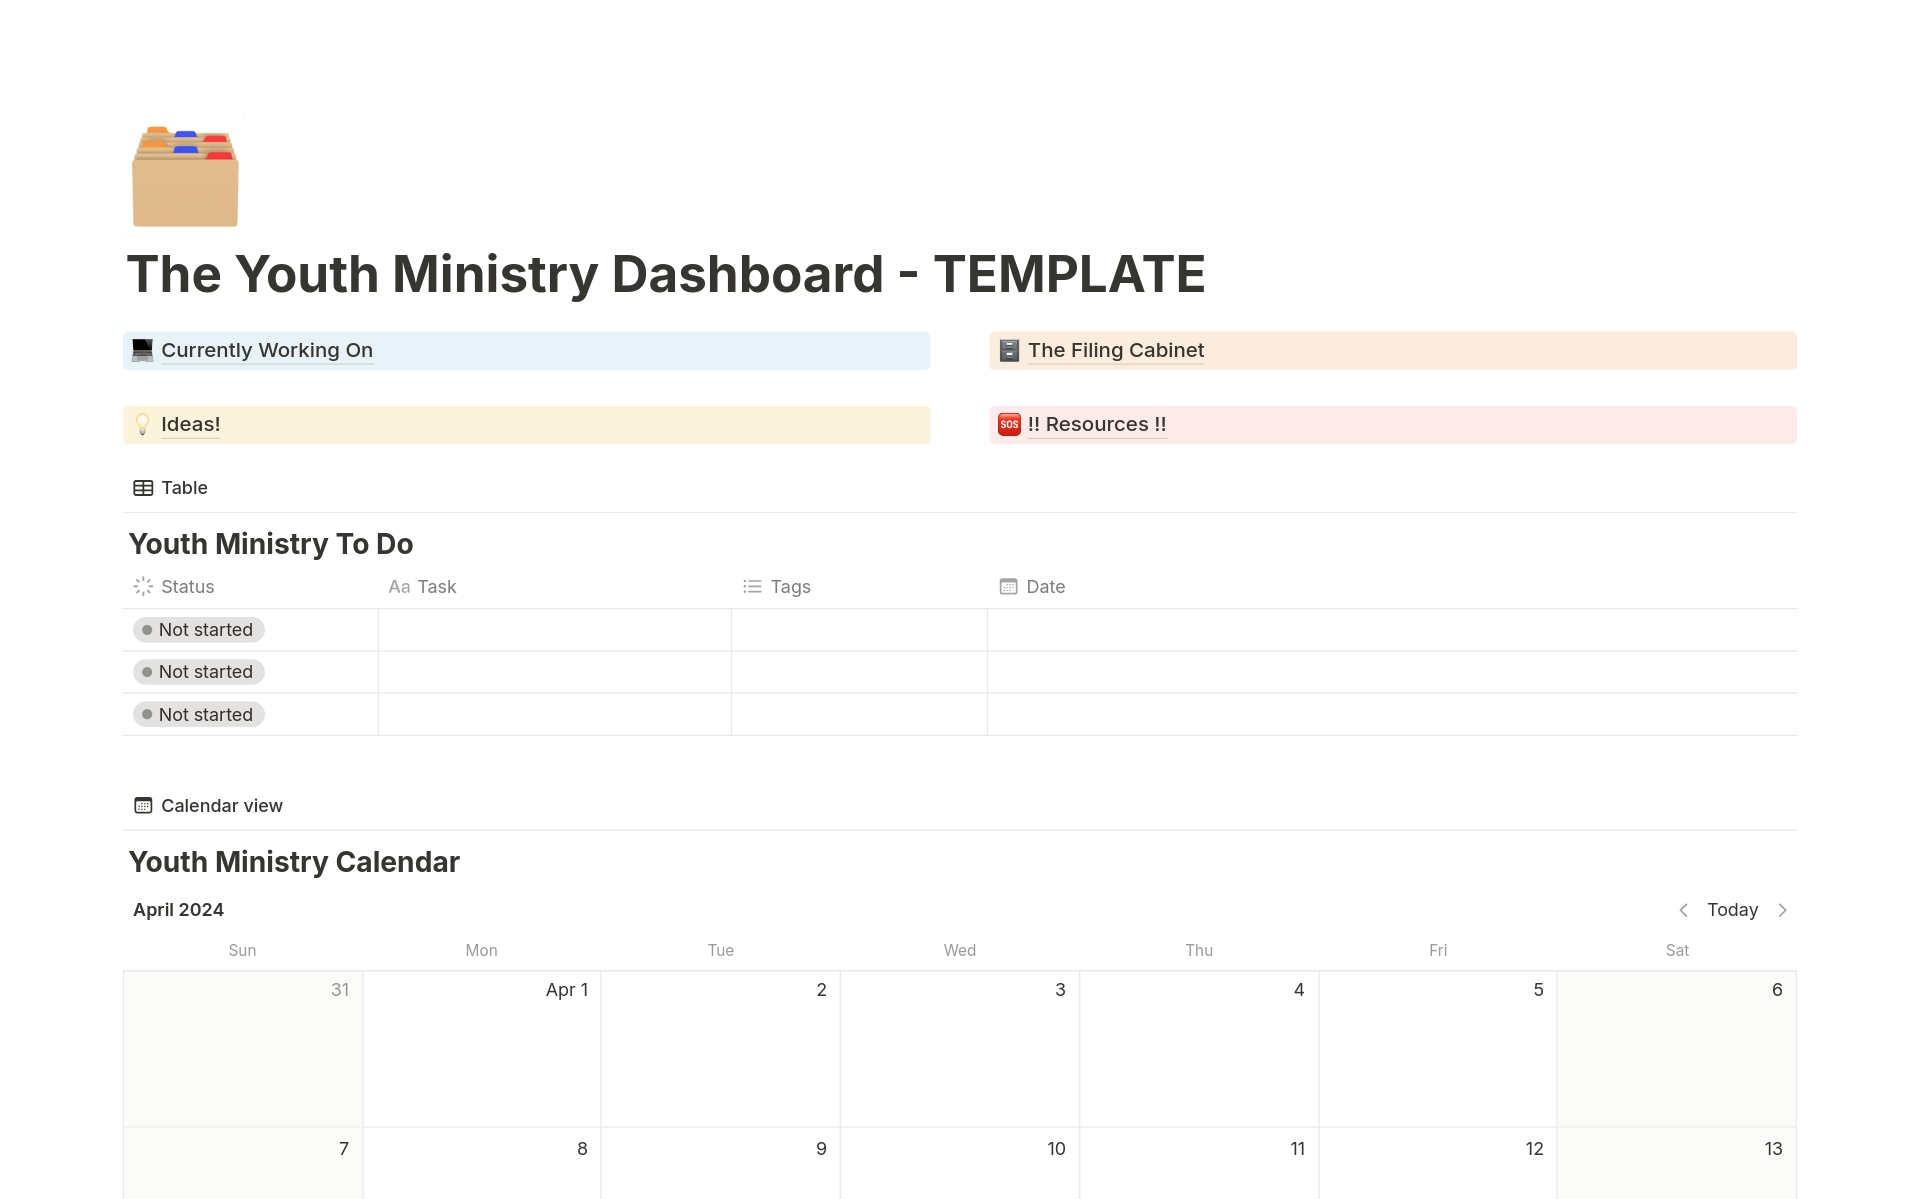 This Template is intended to help Youth Pastors (or other Ministry Leaders) organize their workflow. 